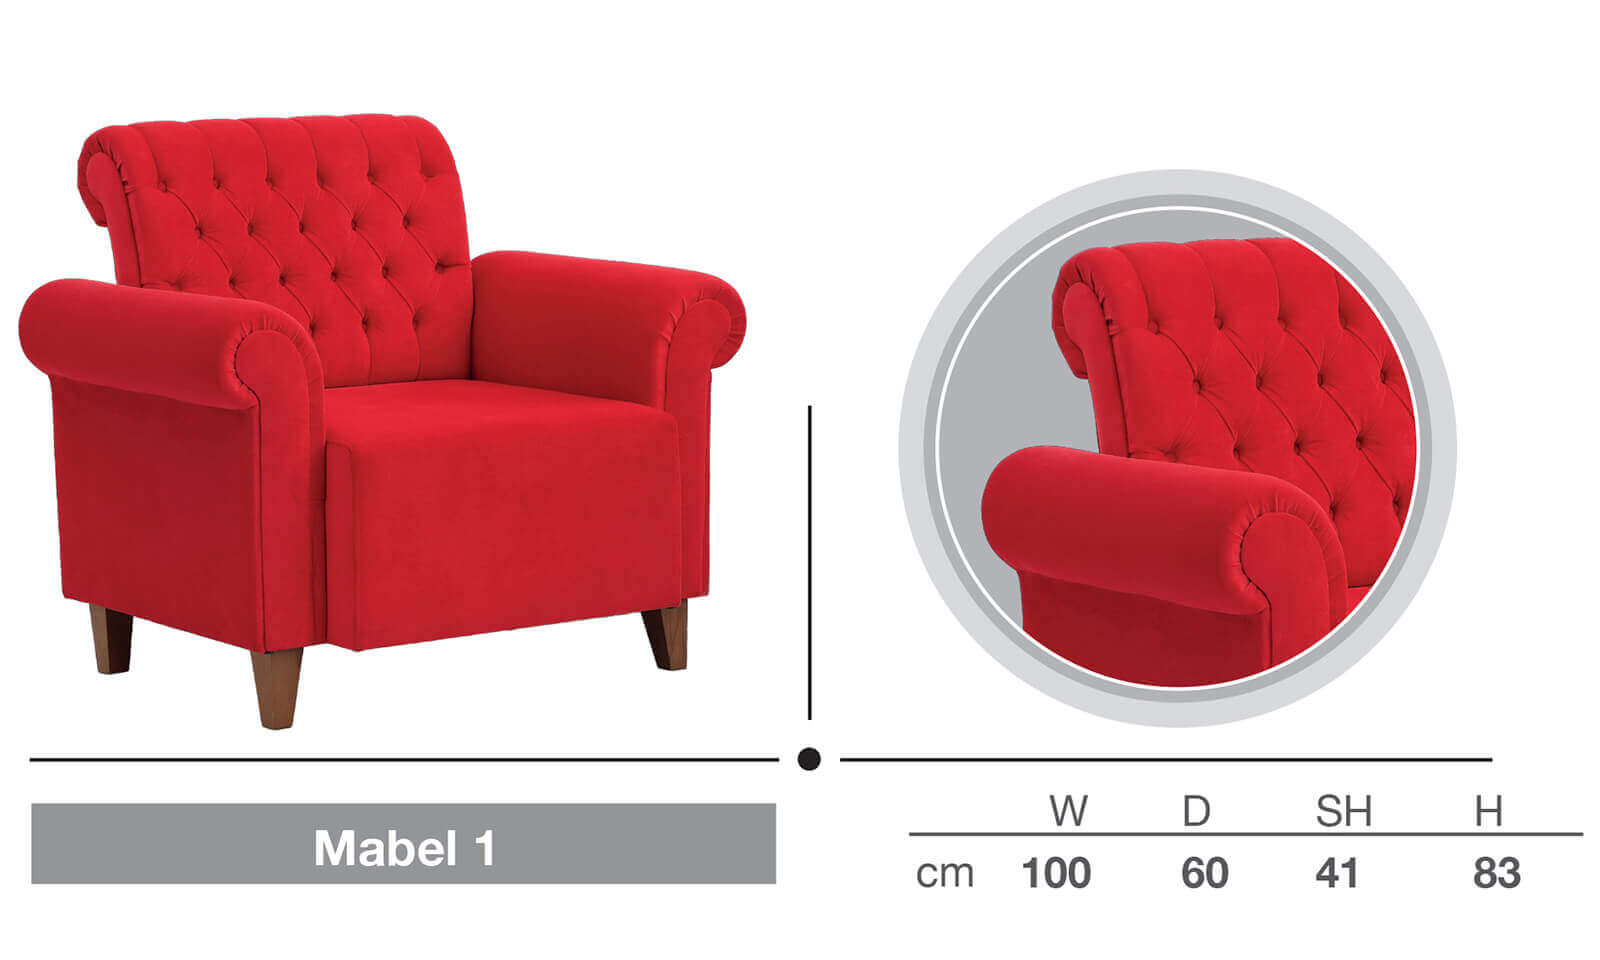 MABEL 1 CHAIR 